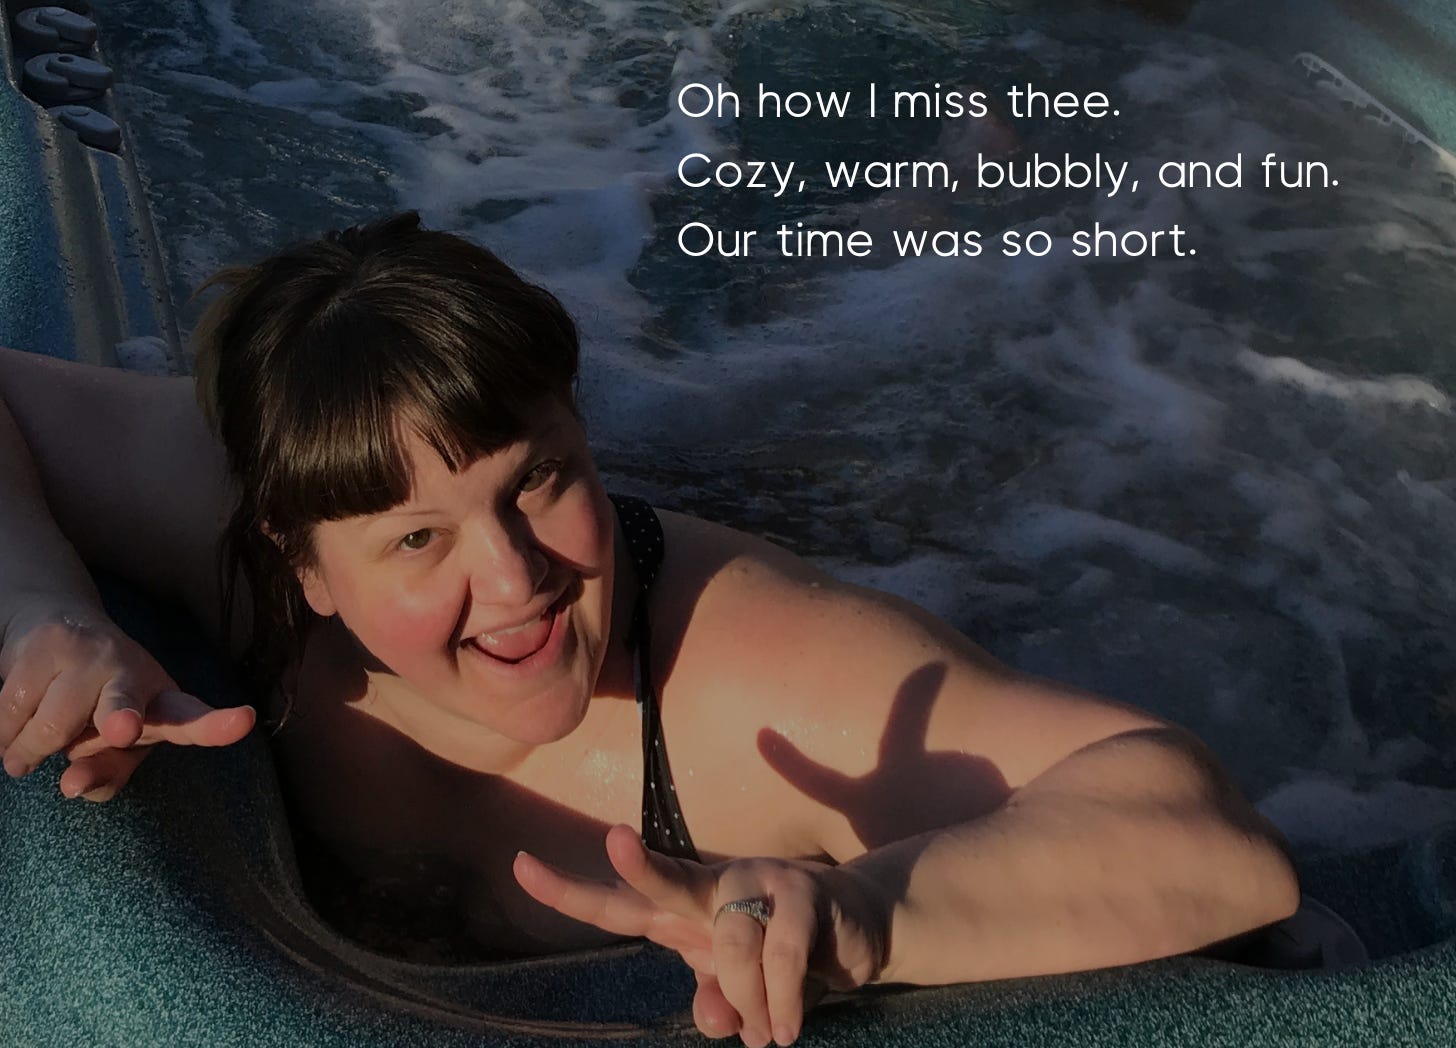 Photo of Deanna making peace signs and smiling while sitting in a bubbling hot tub jacuzzi. The caption is a haiku that says, "Oh how I miss thee. Cozy, warm, bubbly, and fun. Our time was so short."